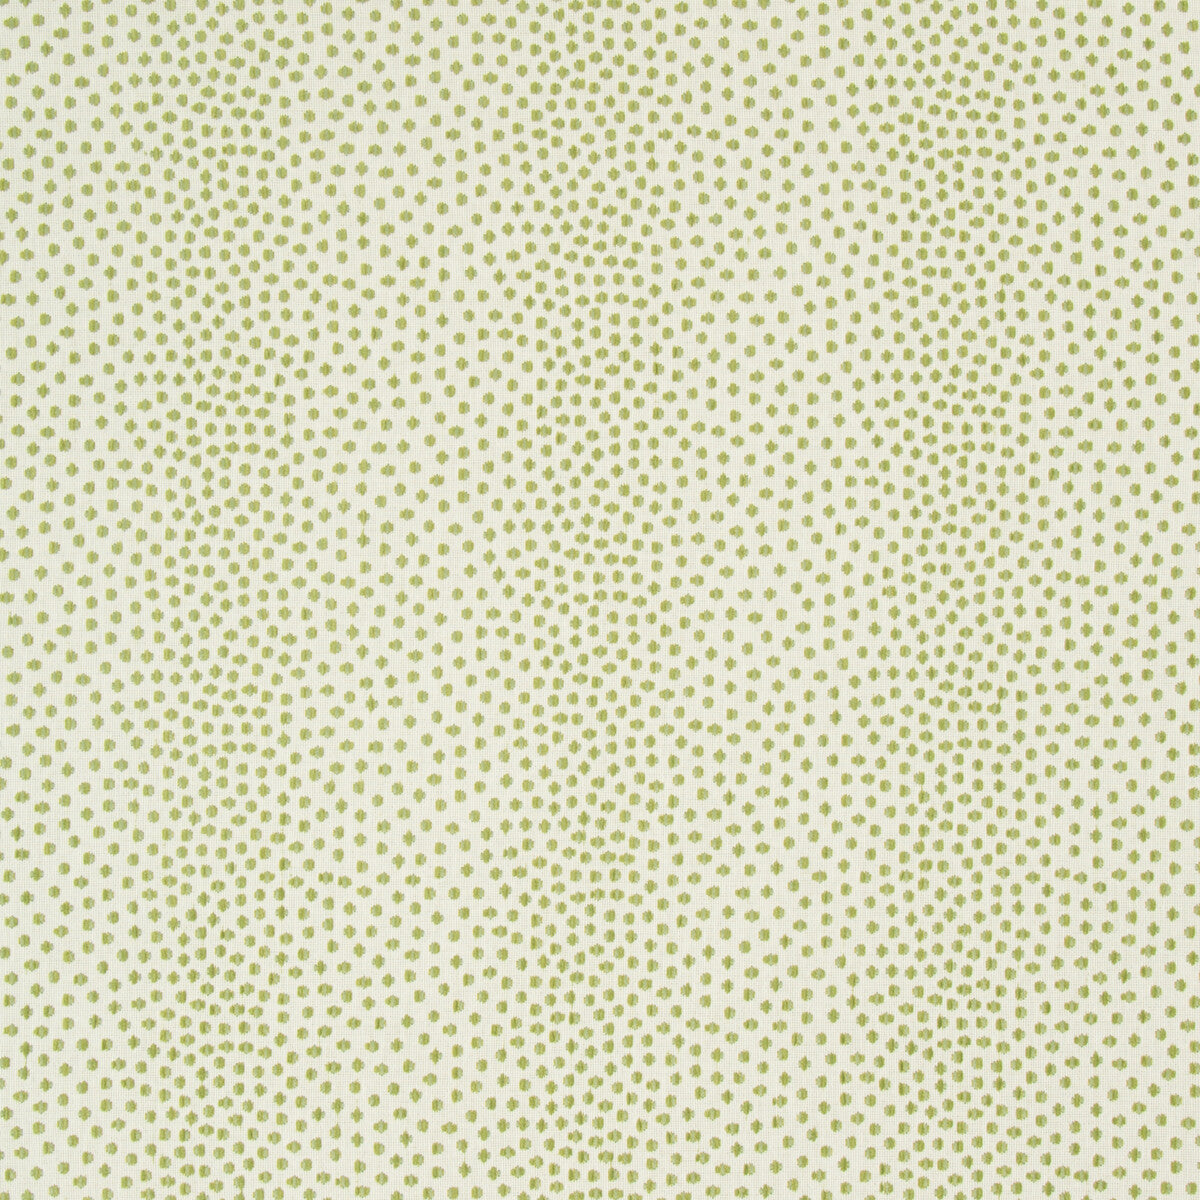 Kravet Design fabric in 34710-13 color - pattern 34710.13.0 - by Kravet Design in the Crypton Home collection